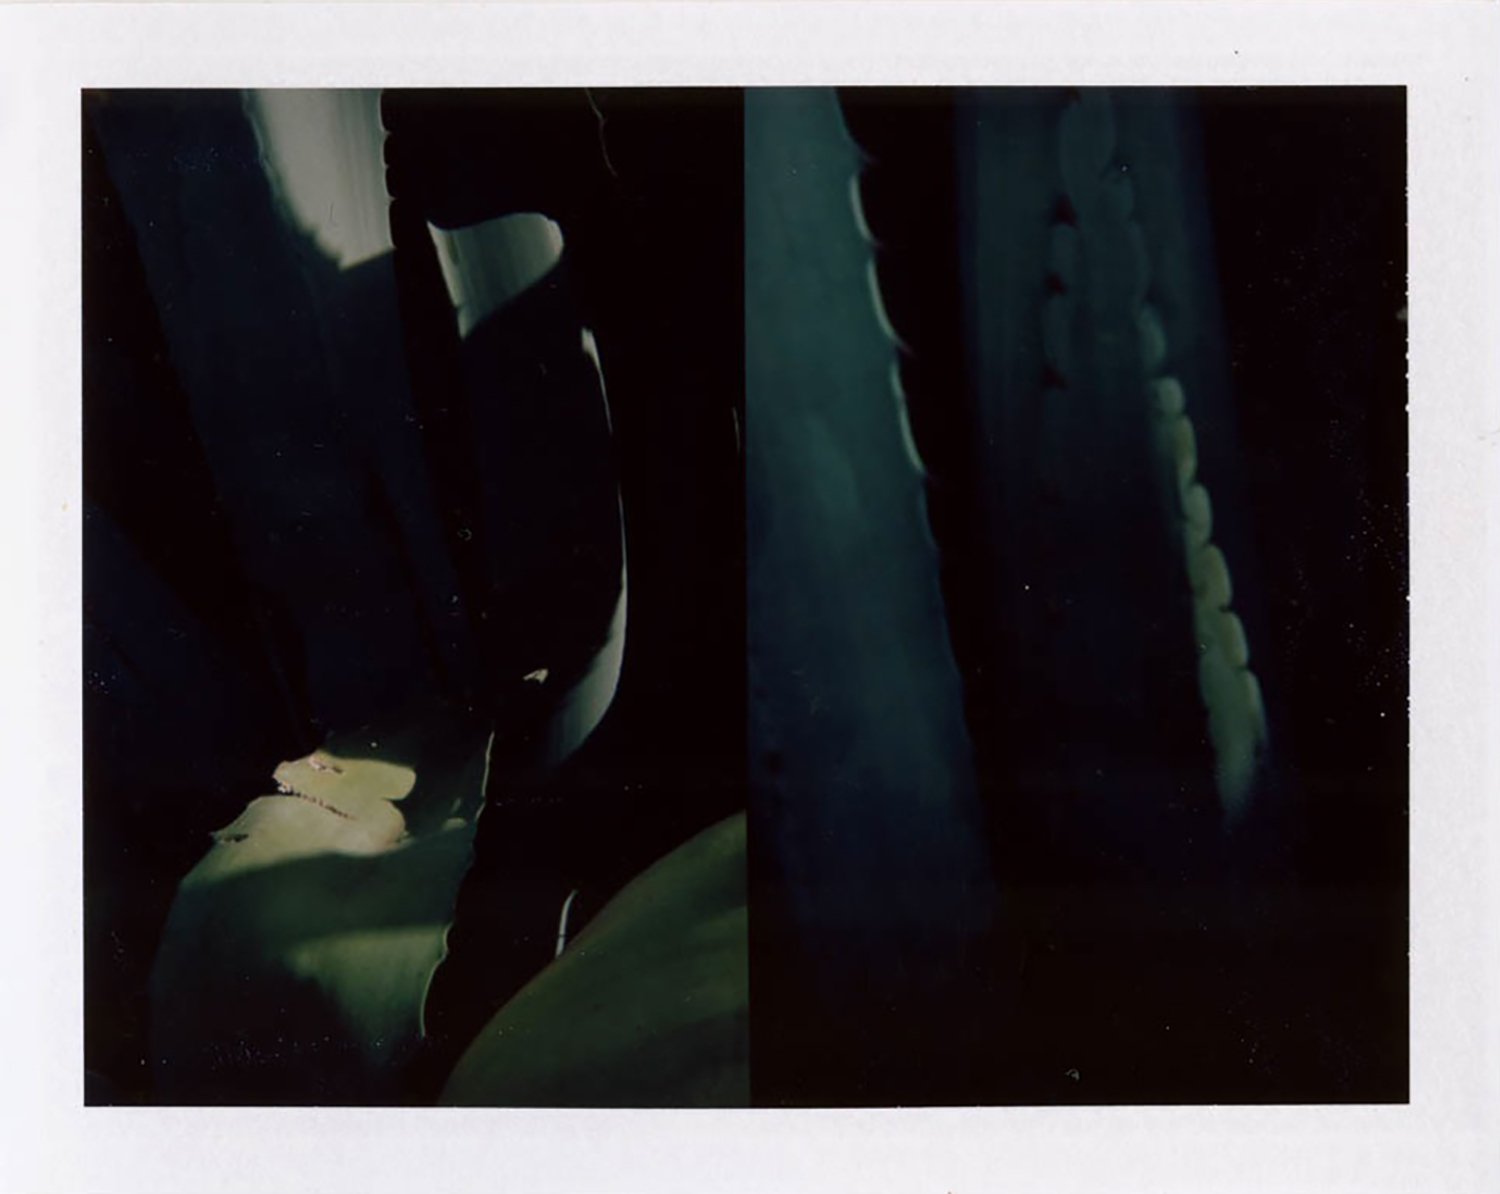  I.D.003, The Polaroid Revolutionary Workers, 2013, Polaroid Picture, 107mm x 86mm 